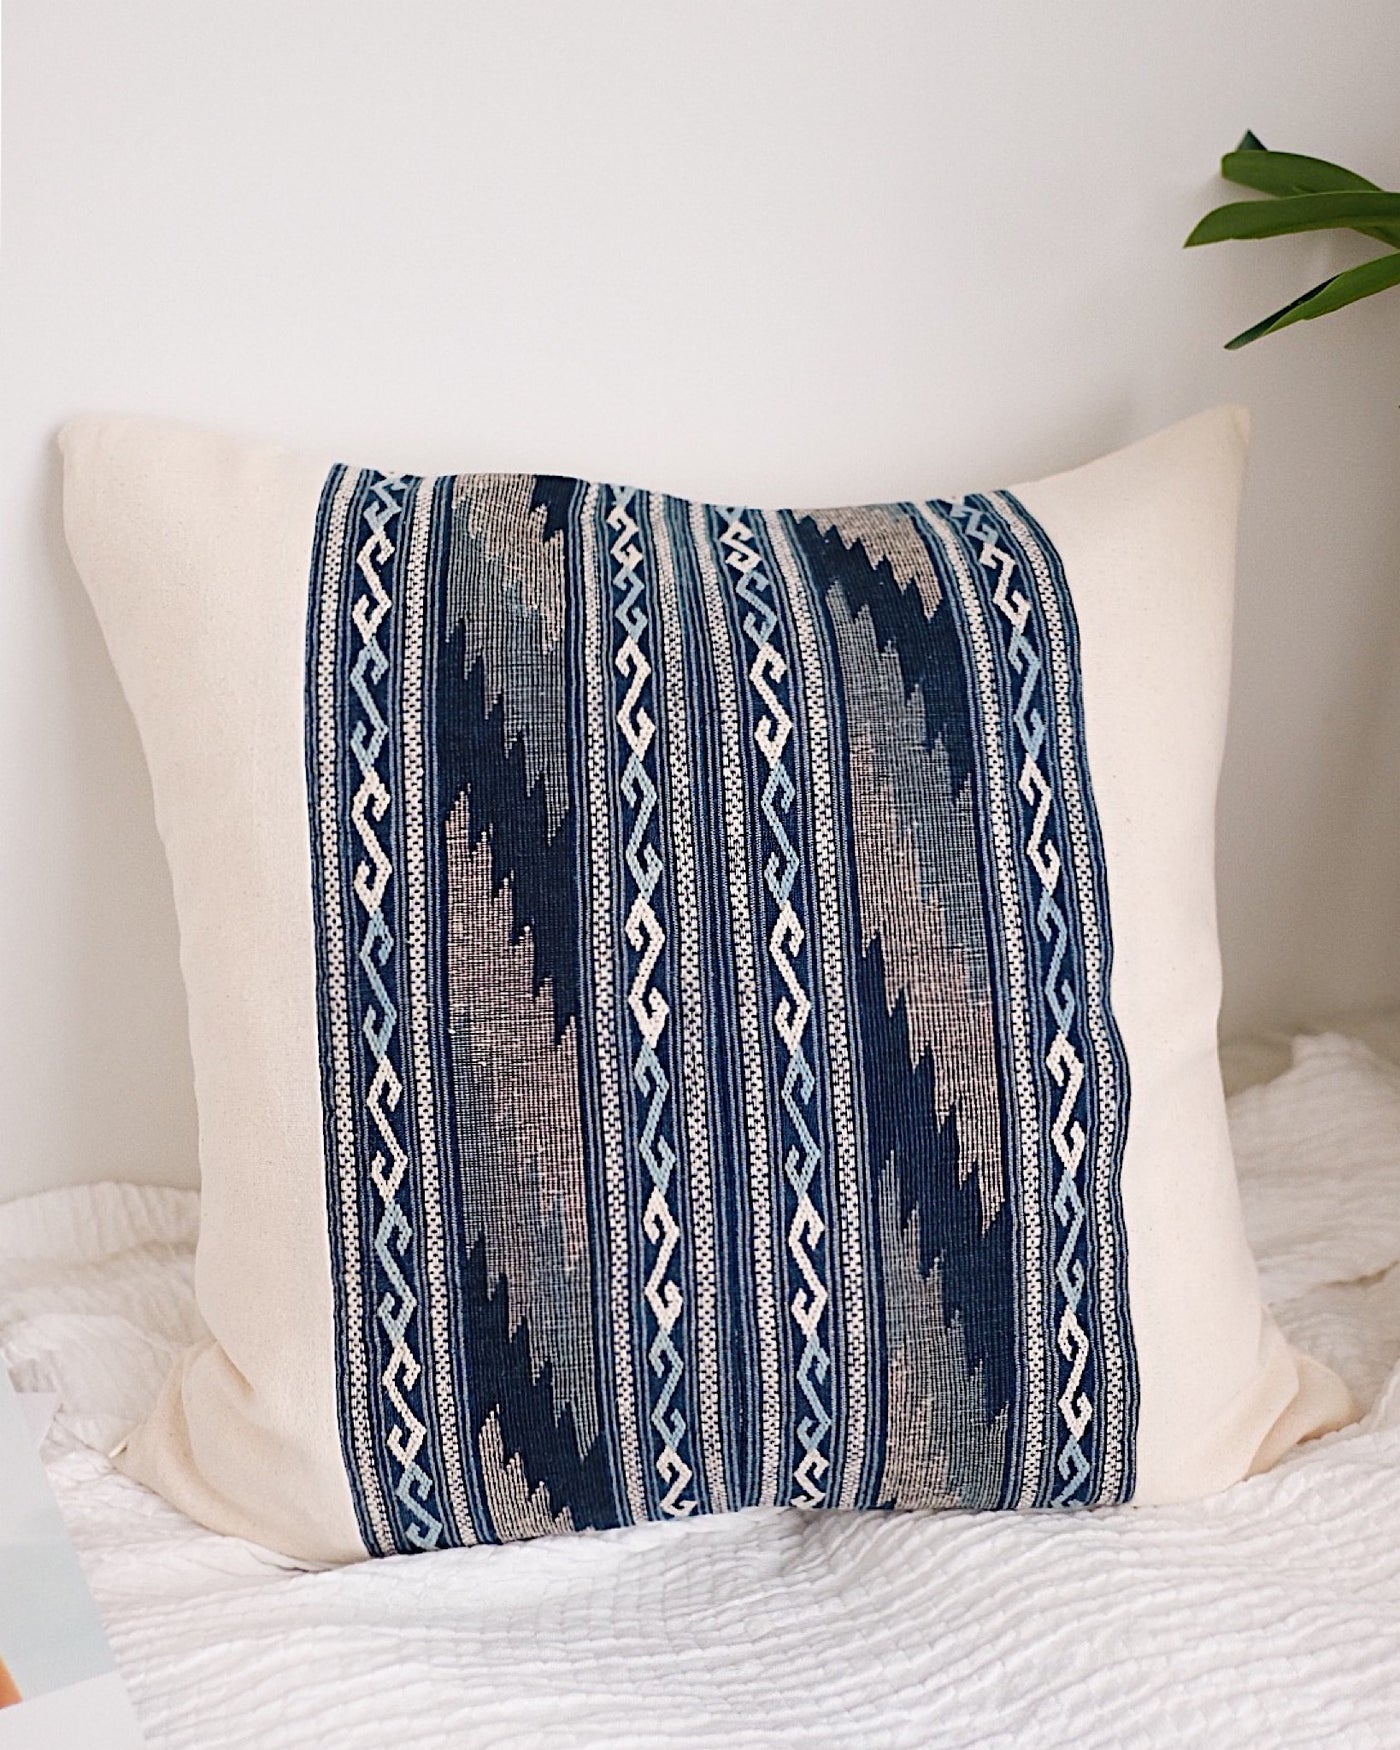 Hill Tribe Handwoven Pillow Cover No.1 | Olive & Iris